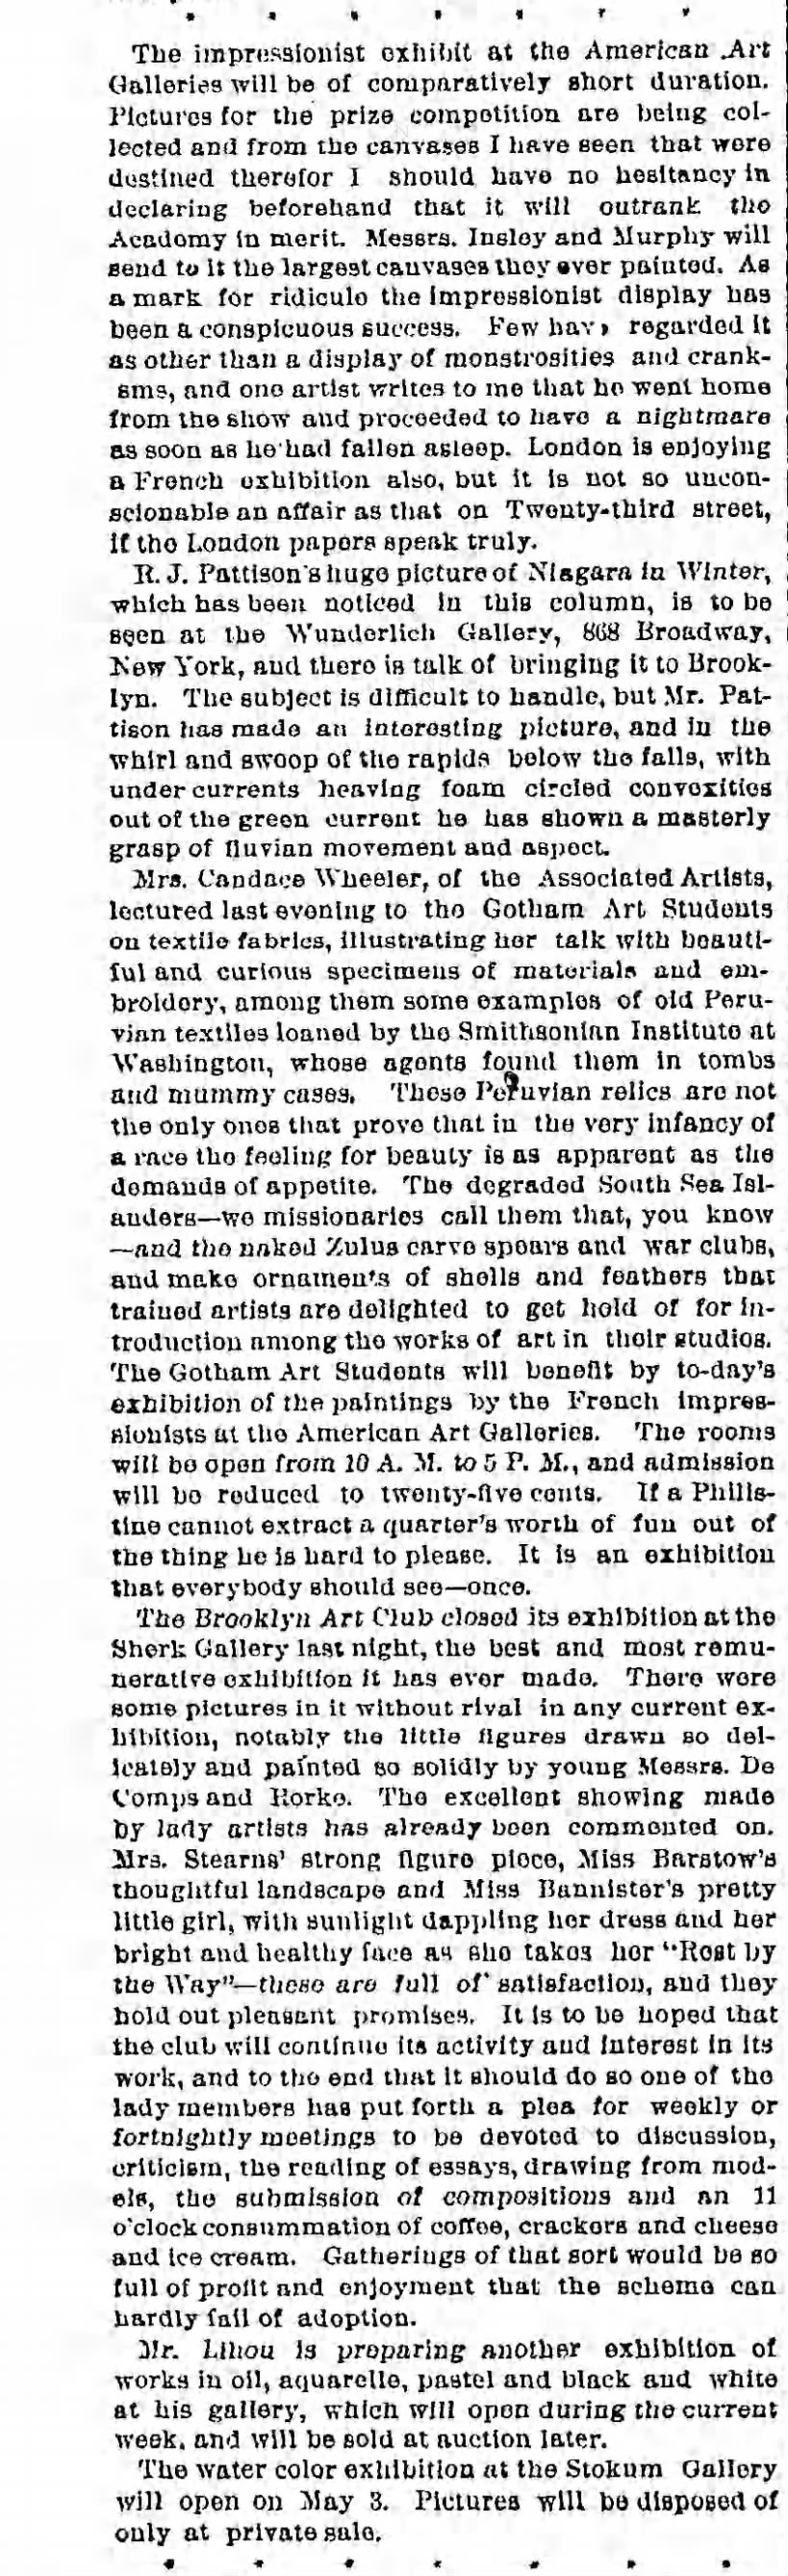 Negative review of French Impressionism exhibit in NYC in 1866.